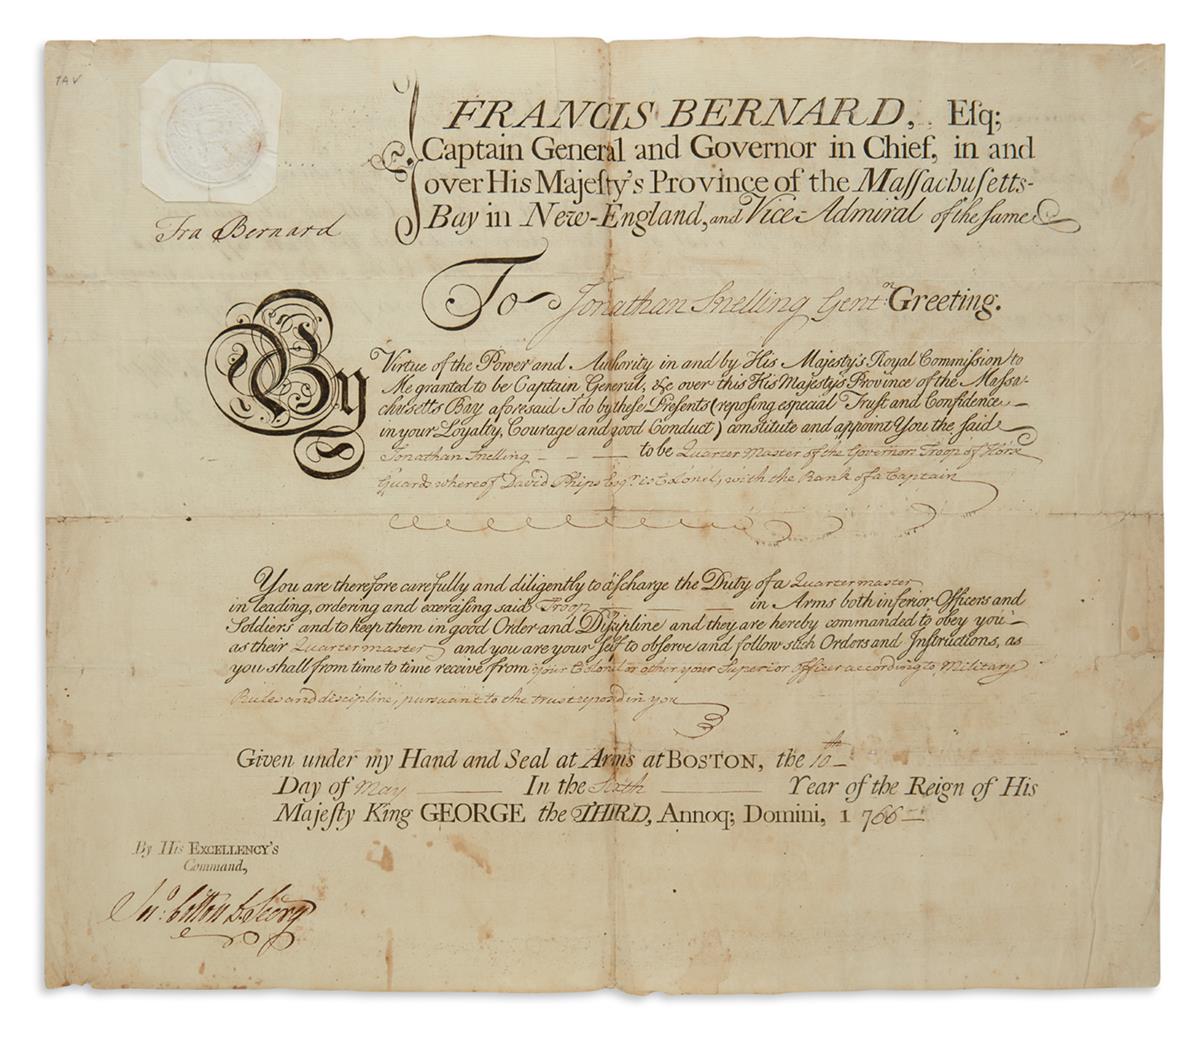 FRANCIS BERNARD. Partly-printed Document Signed, Fra Bernard, as Governor, military commission appointing Jona...